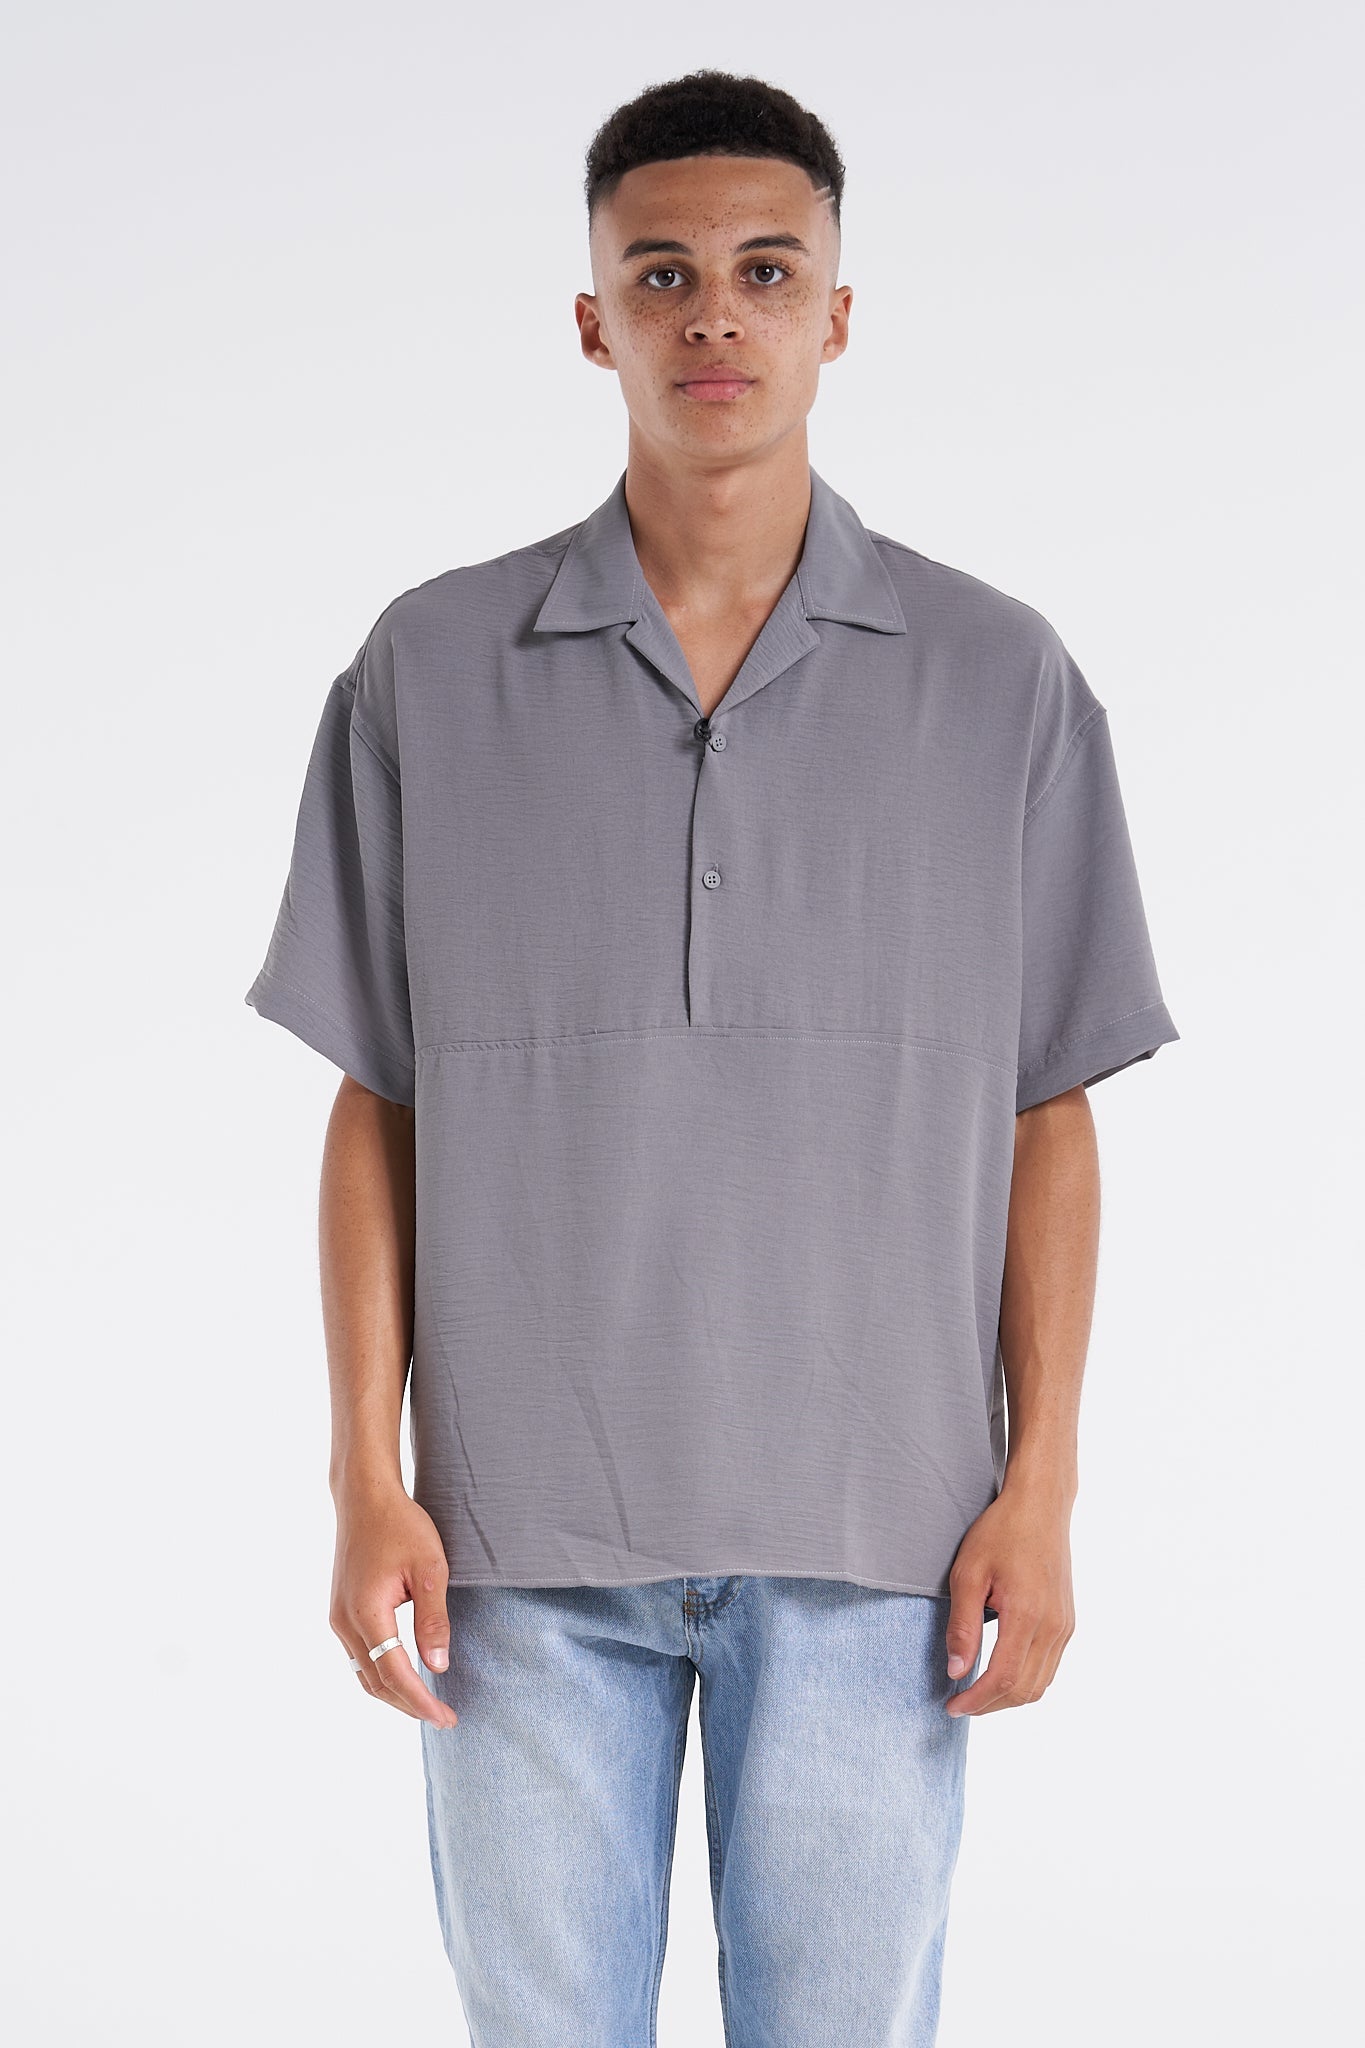 Wrinkled Textured Look Blouse Shirt - UNEFFECTED STUDIOS® - Shirts & Tops - UNEFFECTED STUDIOS®